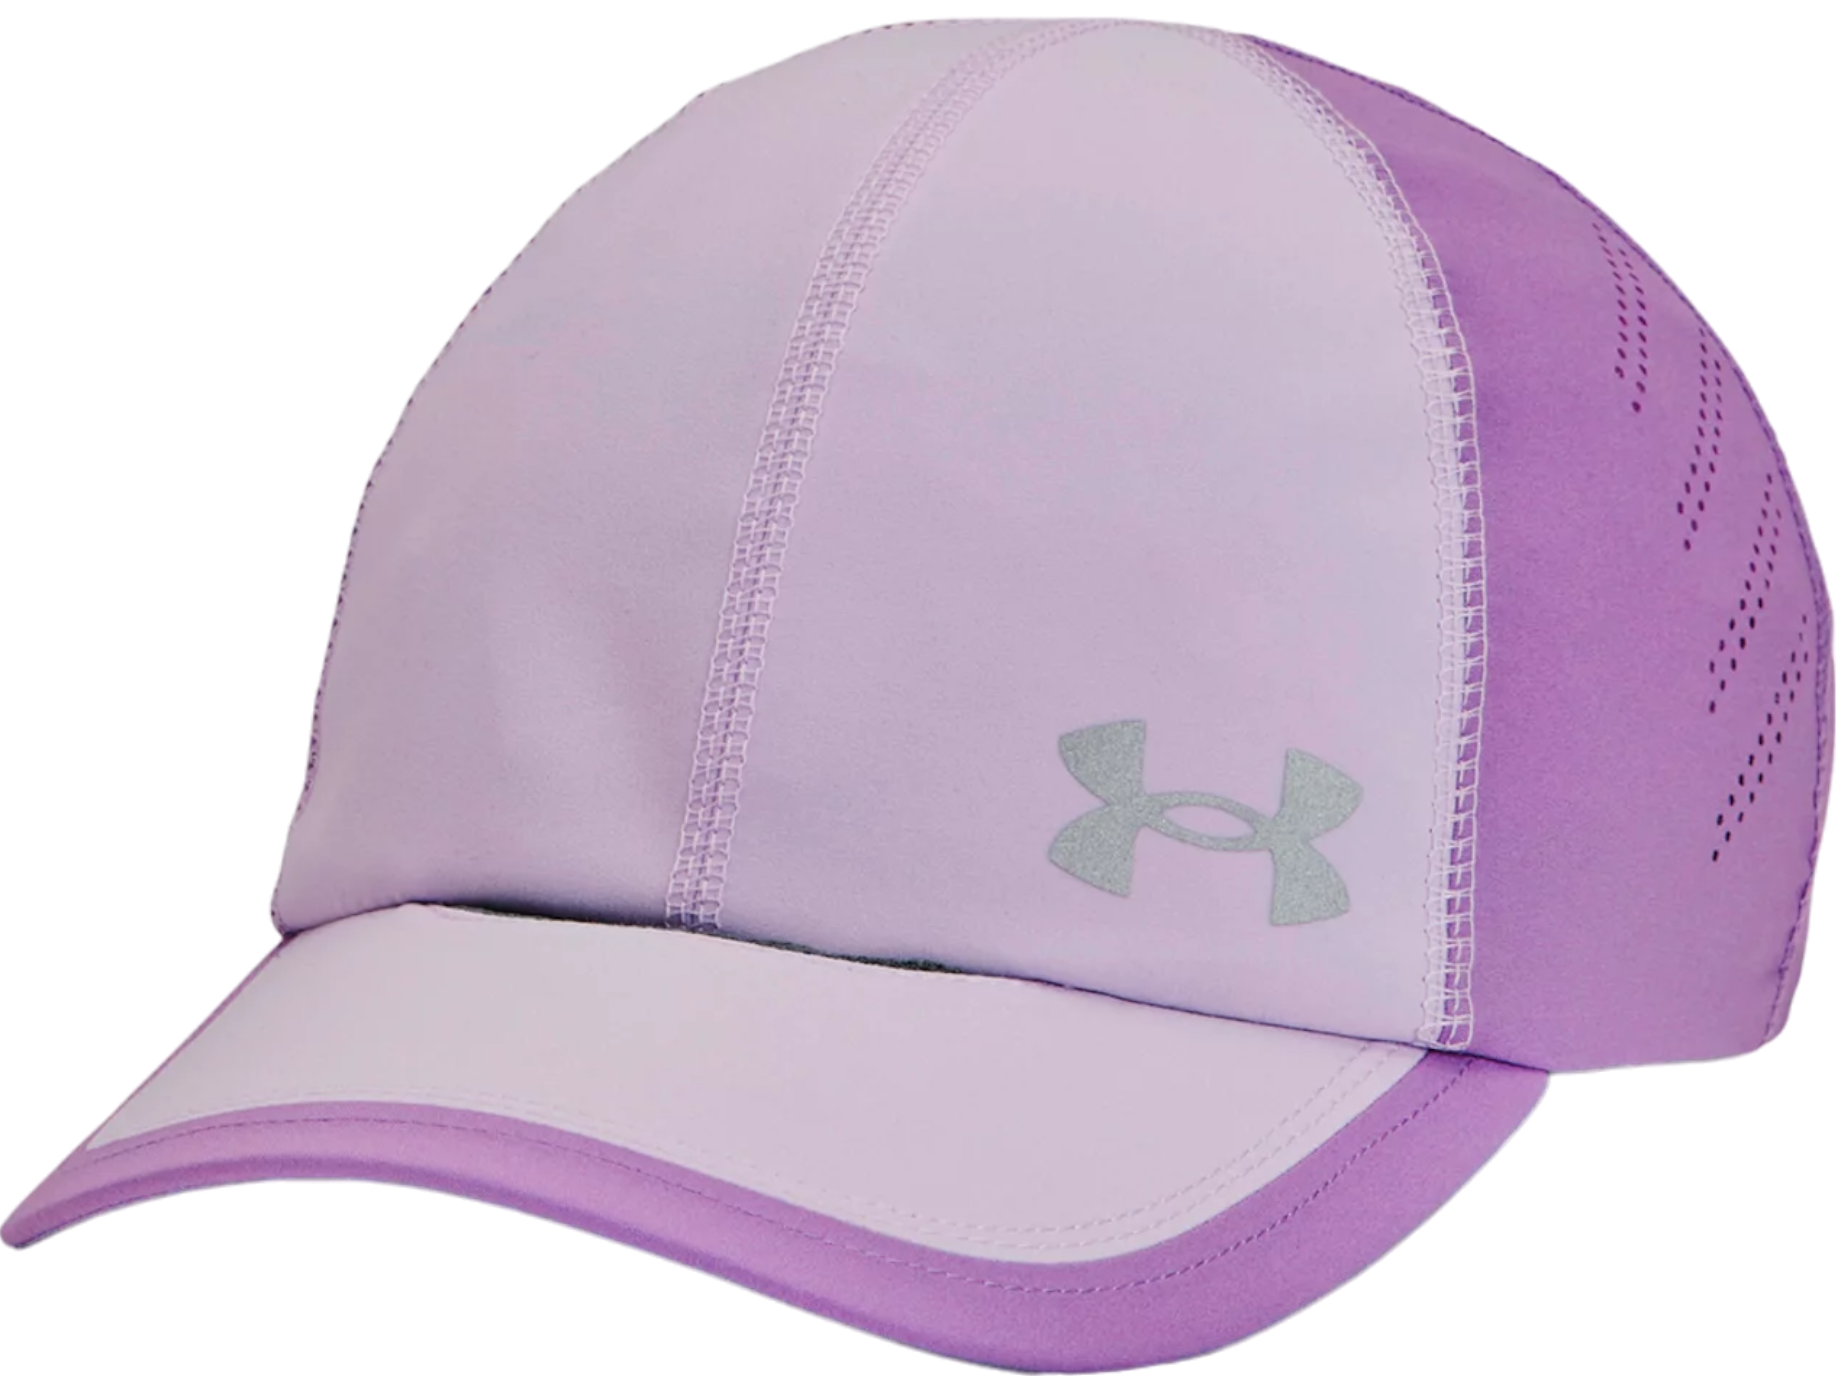 Under Armour Iso-chill Launch Adjustable Baseball sapka